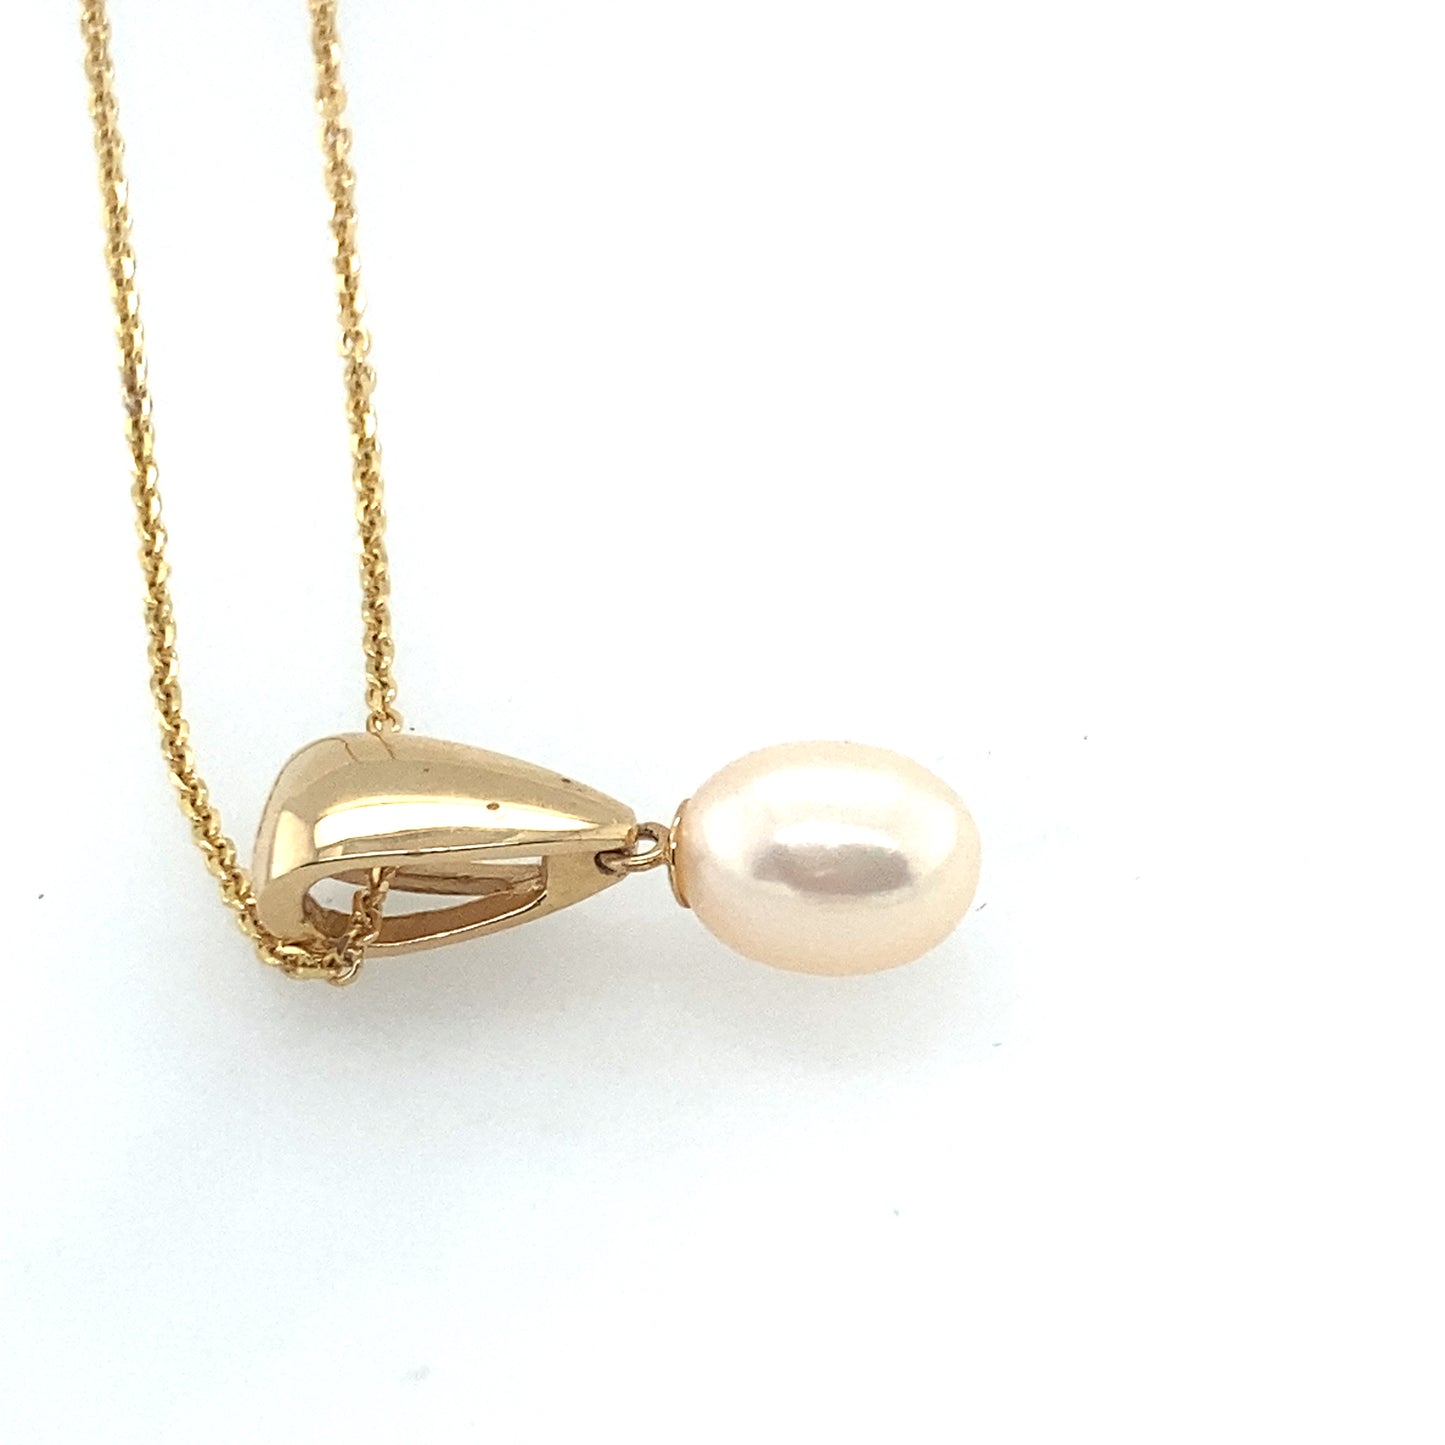 14k yellow fold fresh water 14mm pearl pendant with 14k yellow gold 20 inch chain.